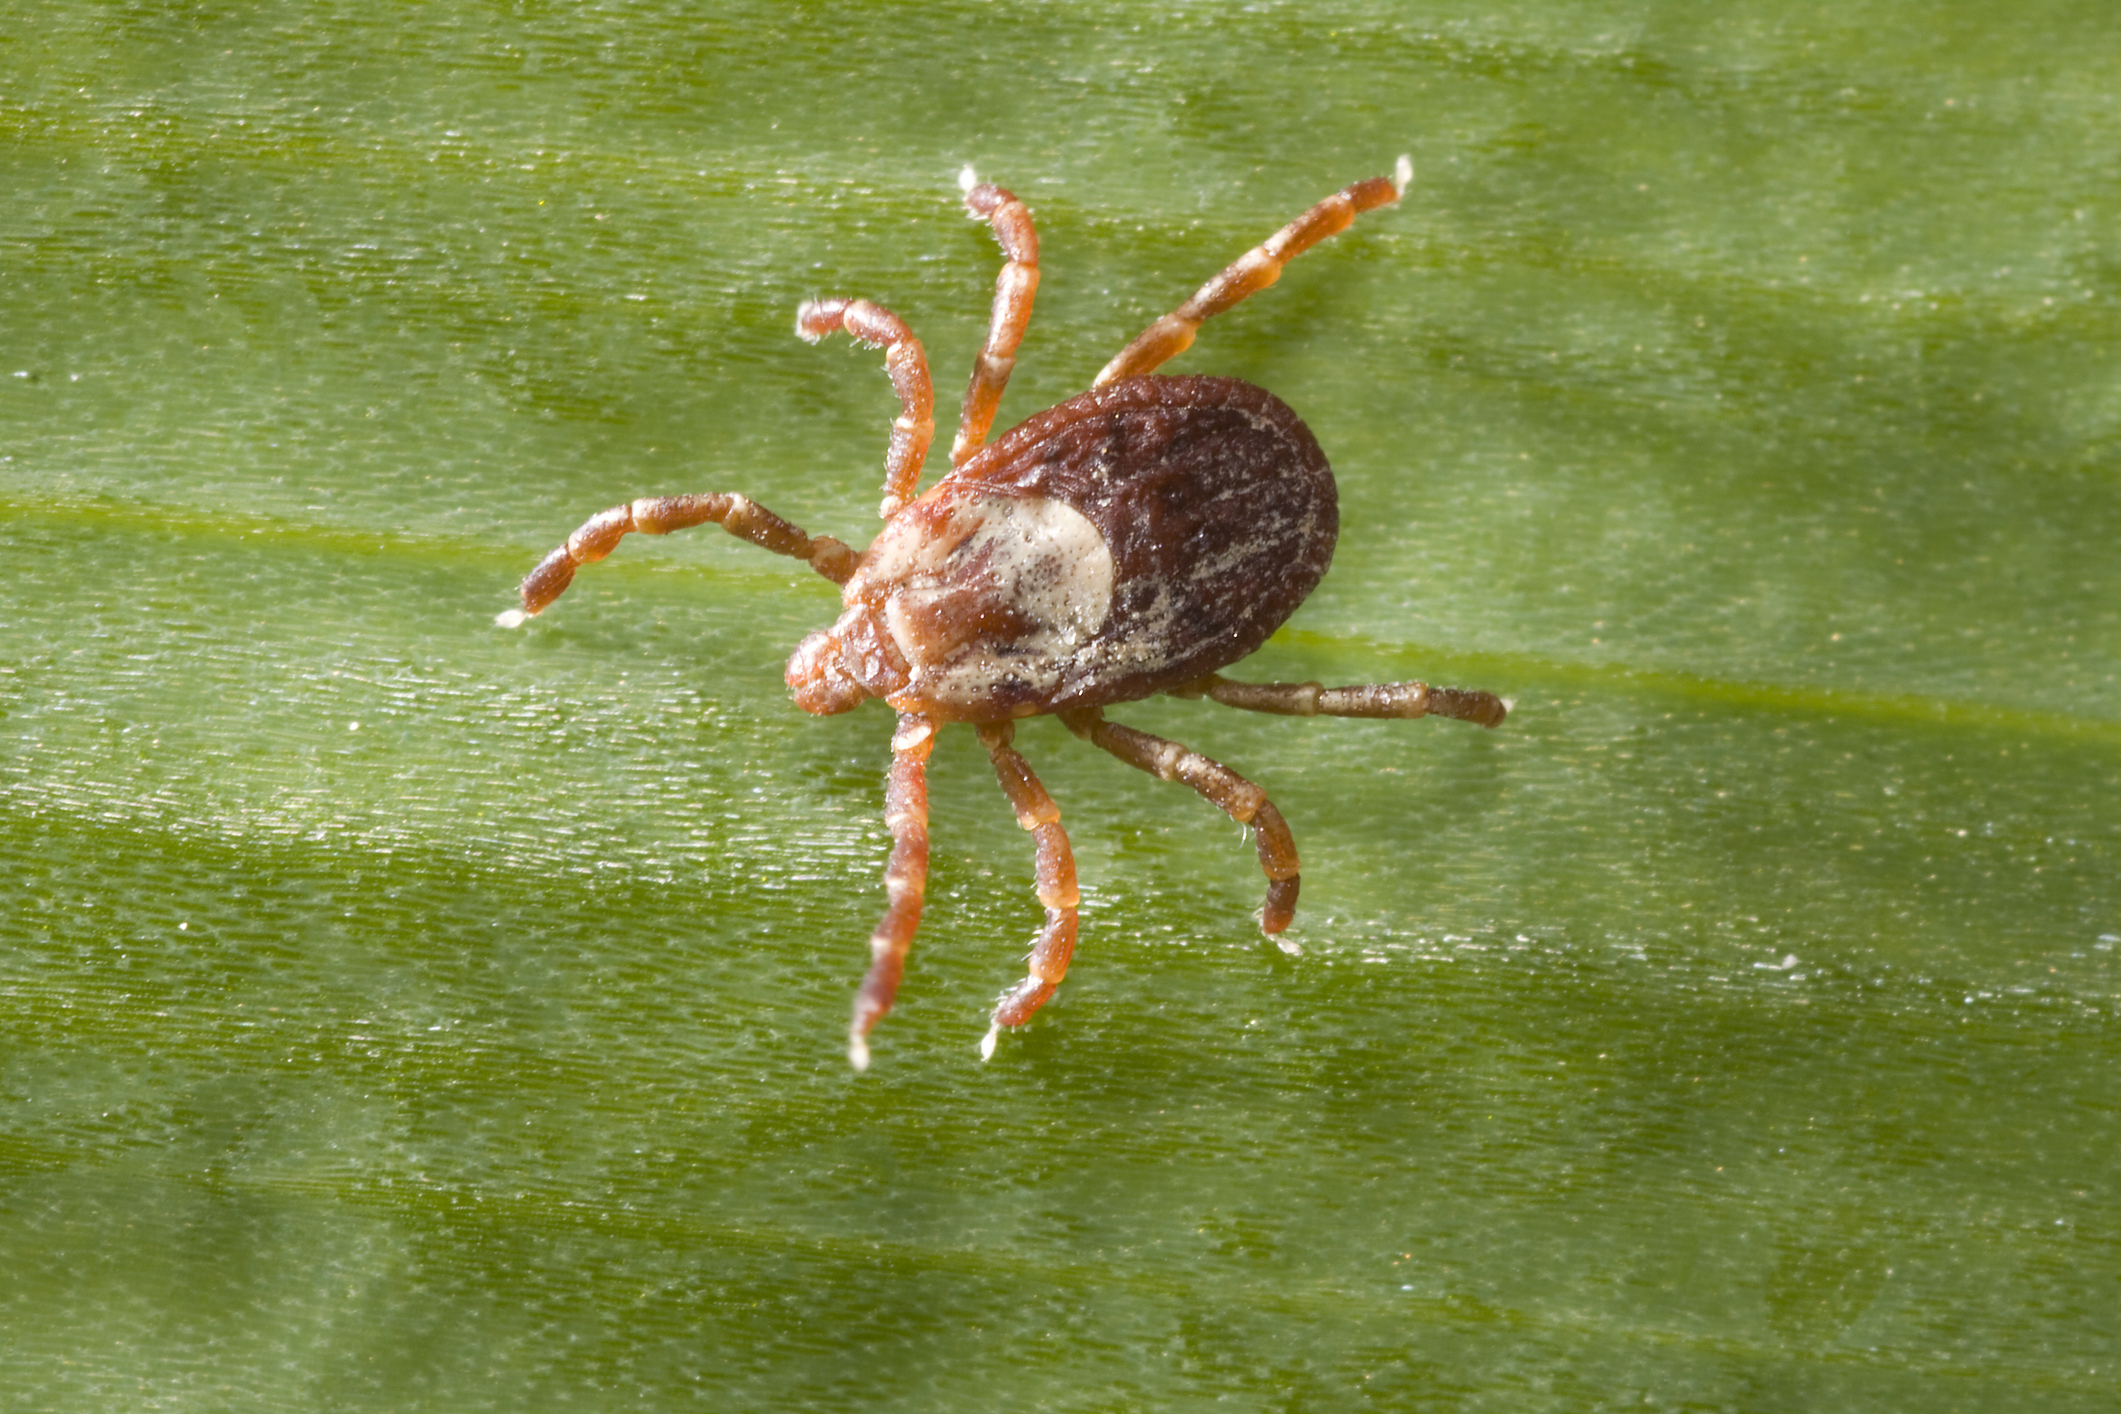 PHOTO: Rocky Mountain wood tick, Dermacentor andersoni, is seen pictured in this undated stock photo.